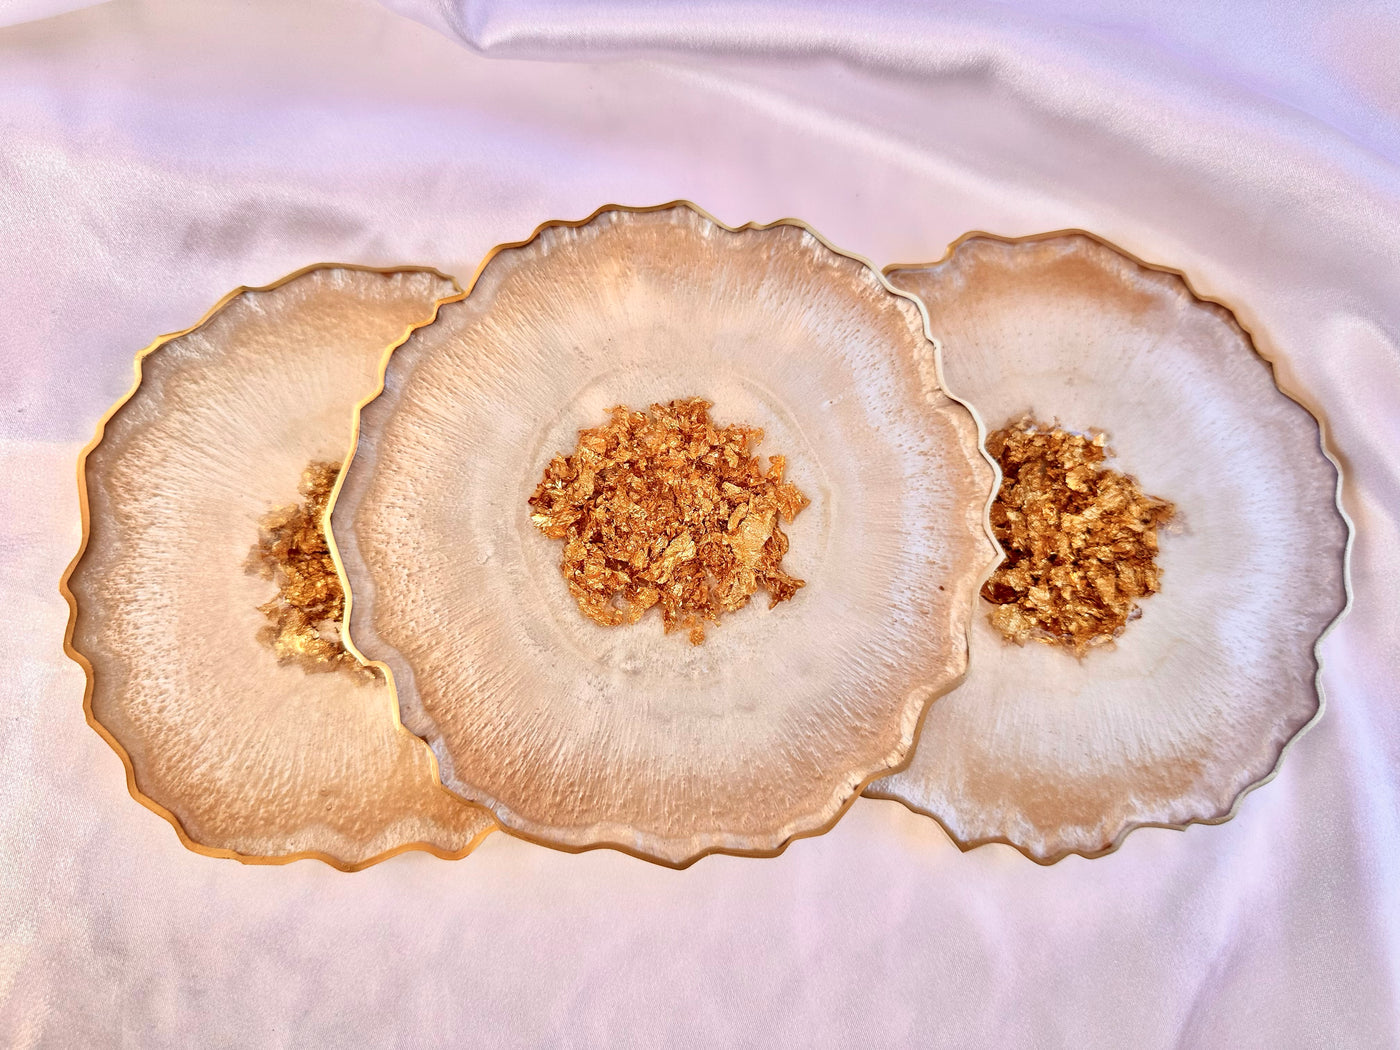 Handmade Beige Cream and Gold Irregular Shaped Large Geode Agate Resin Coasters with Gold Accented Rim Edges - Jasmin Renee Art - Three Coasters